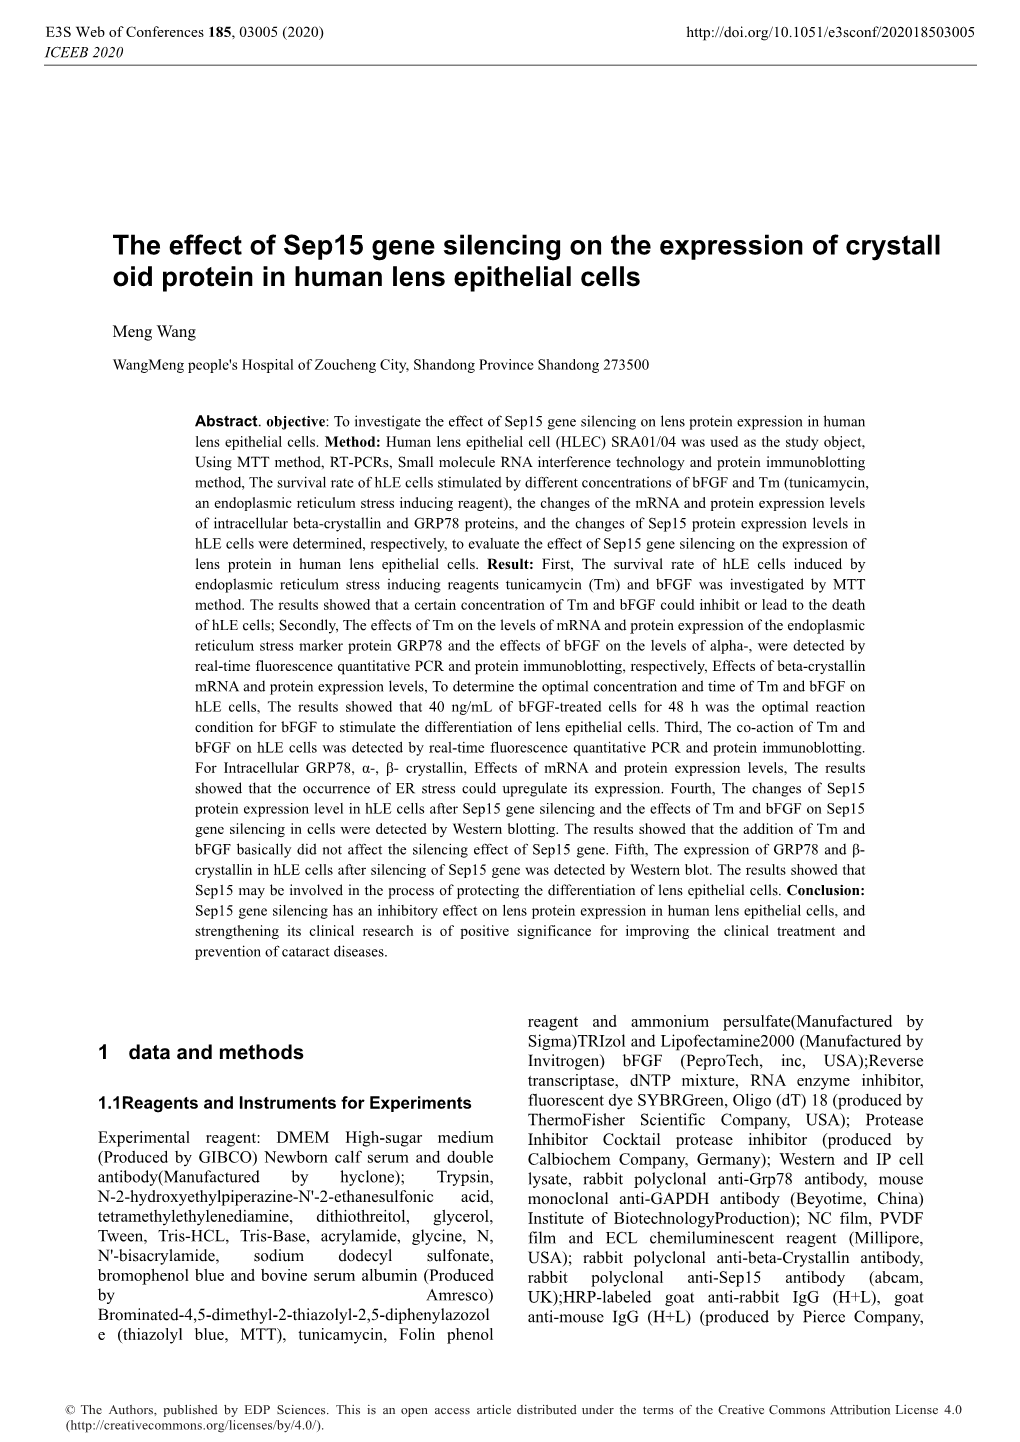 The Effect of Sep15 Gene Silencing on the Expression of Crystall Oid Protein in Human Lens Epithelial Cells